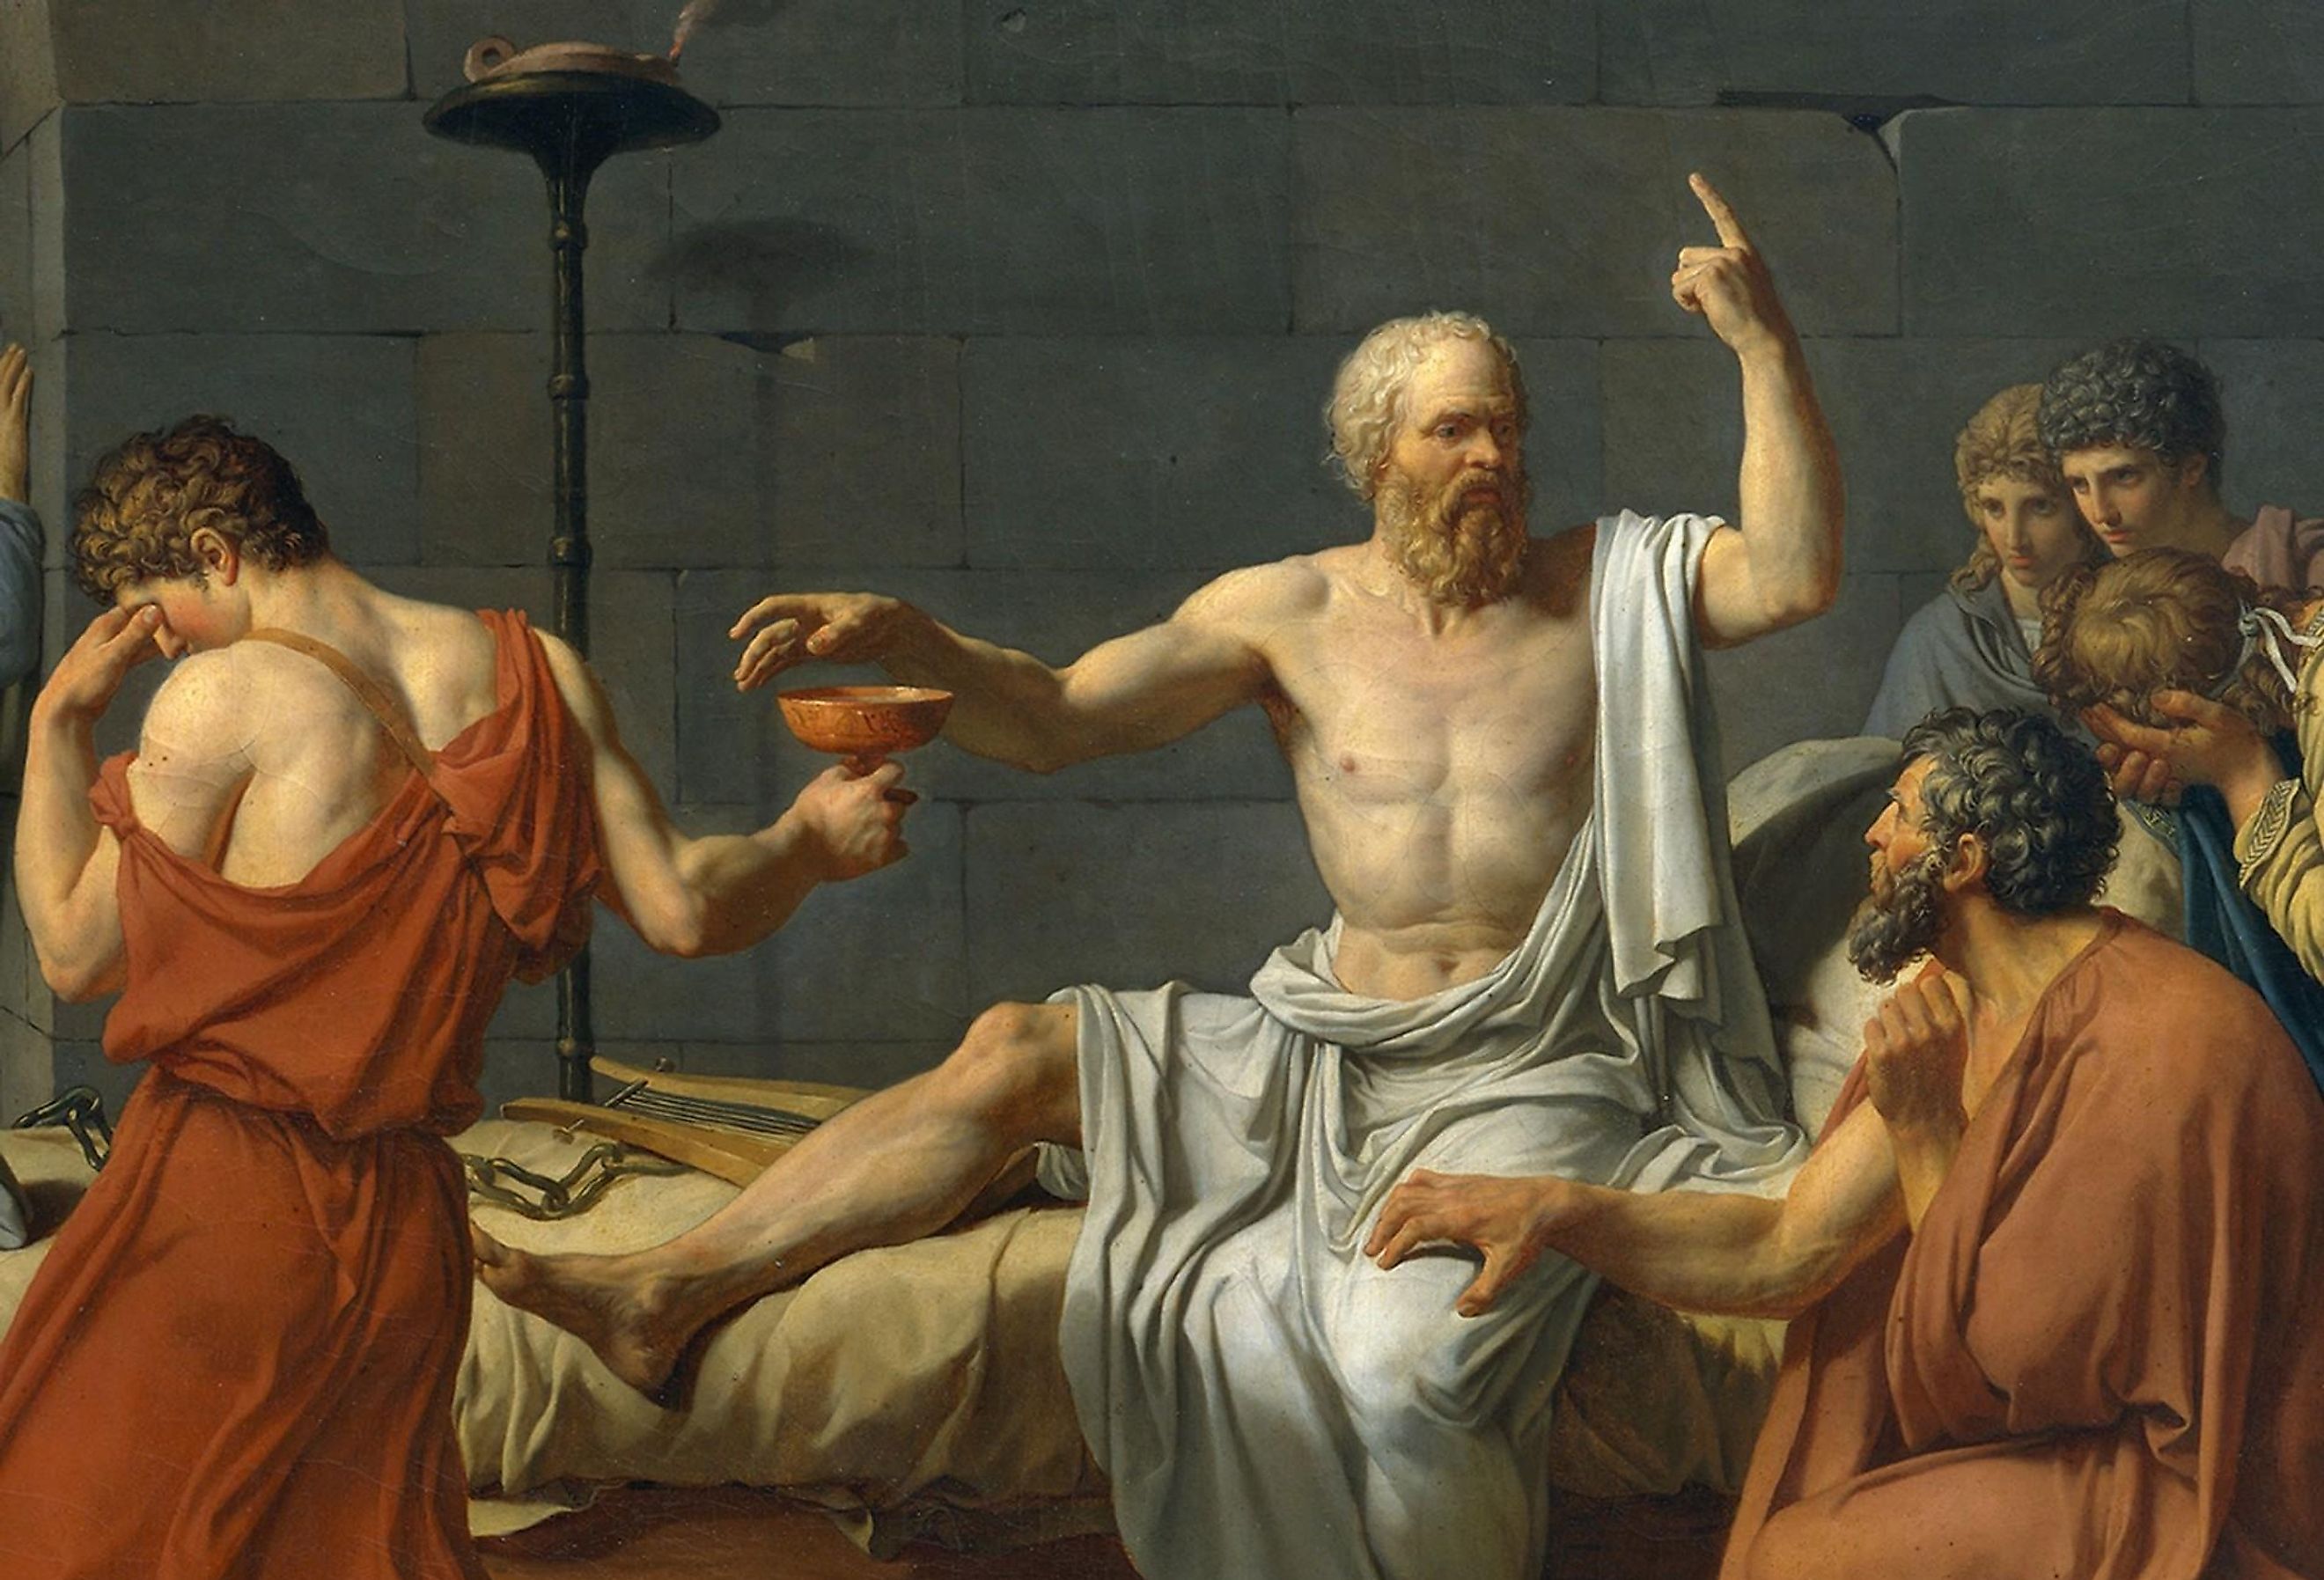 Greek Classical philosopher Socrates about to drink poison hemlock.